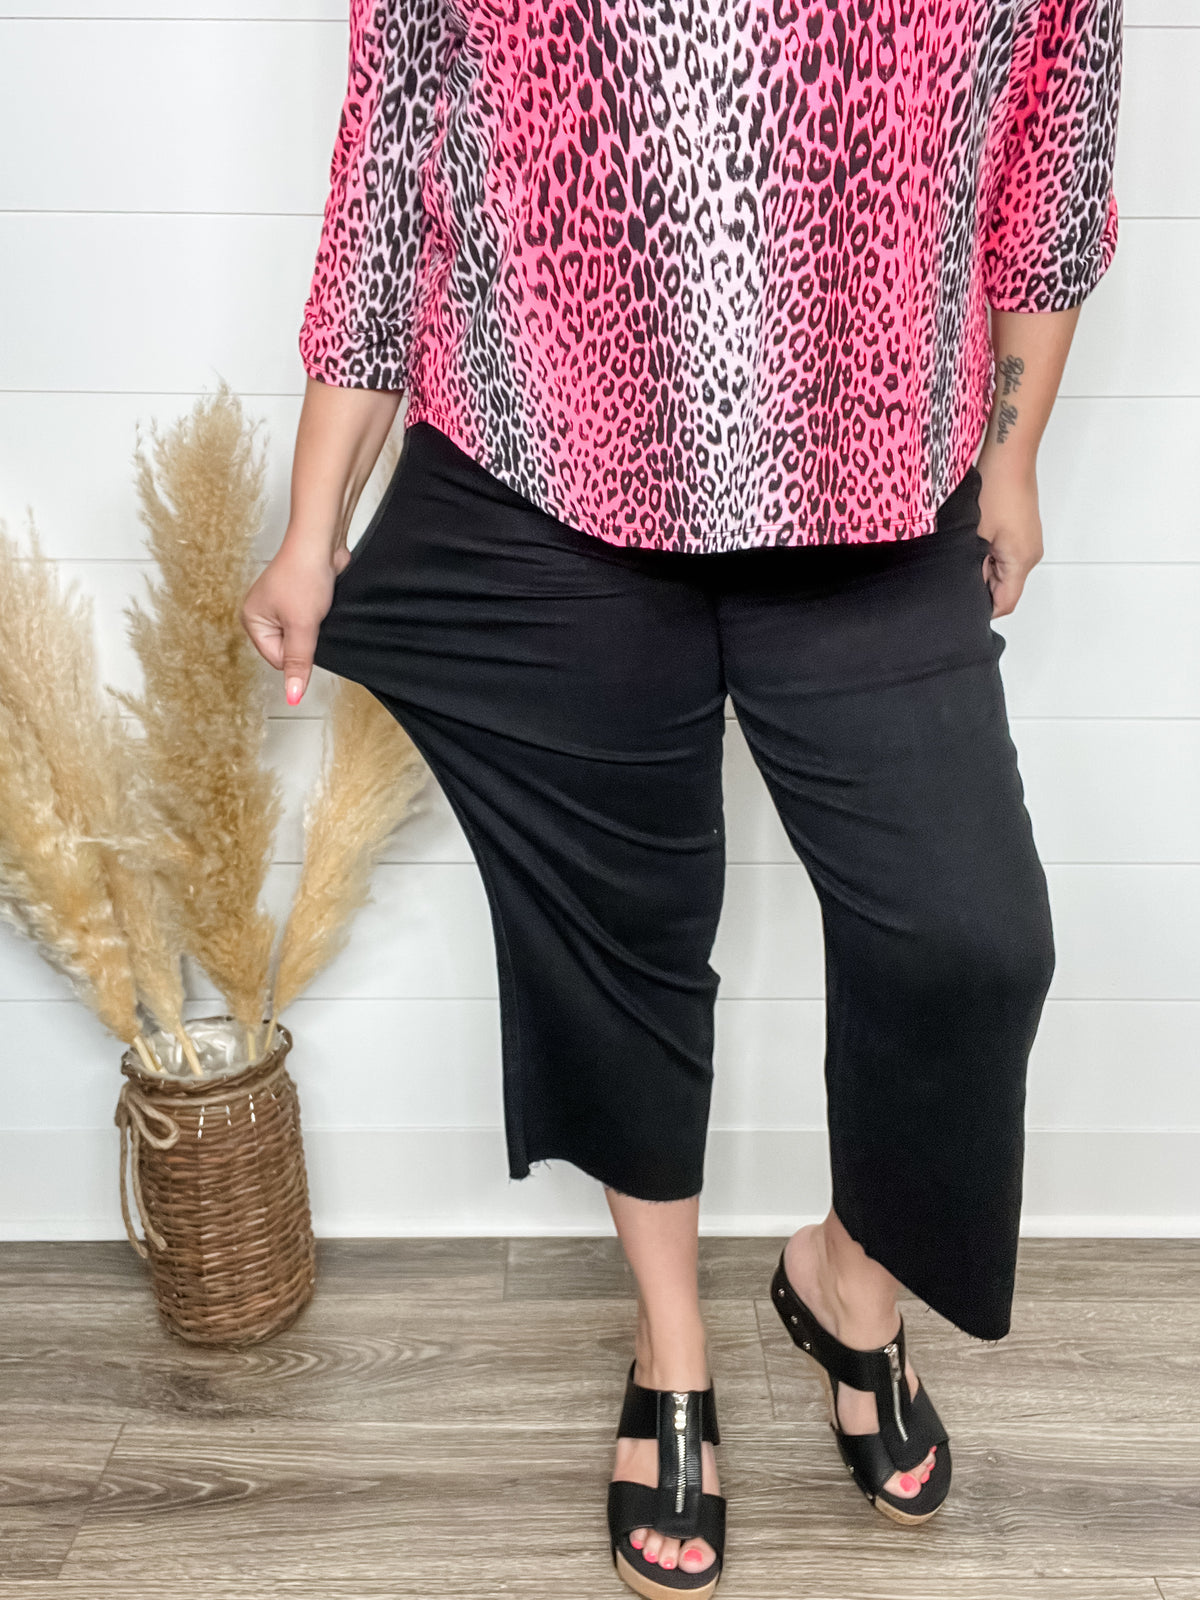 CAPSULE Simply Be Plus Size Black Wide Leg Trousers Stretch Waist Navy Black